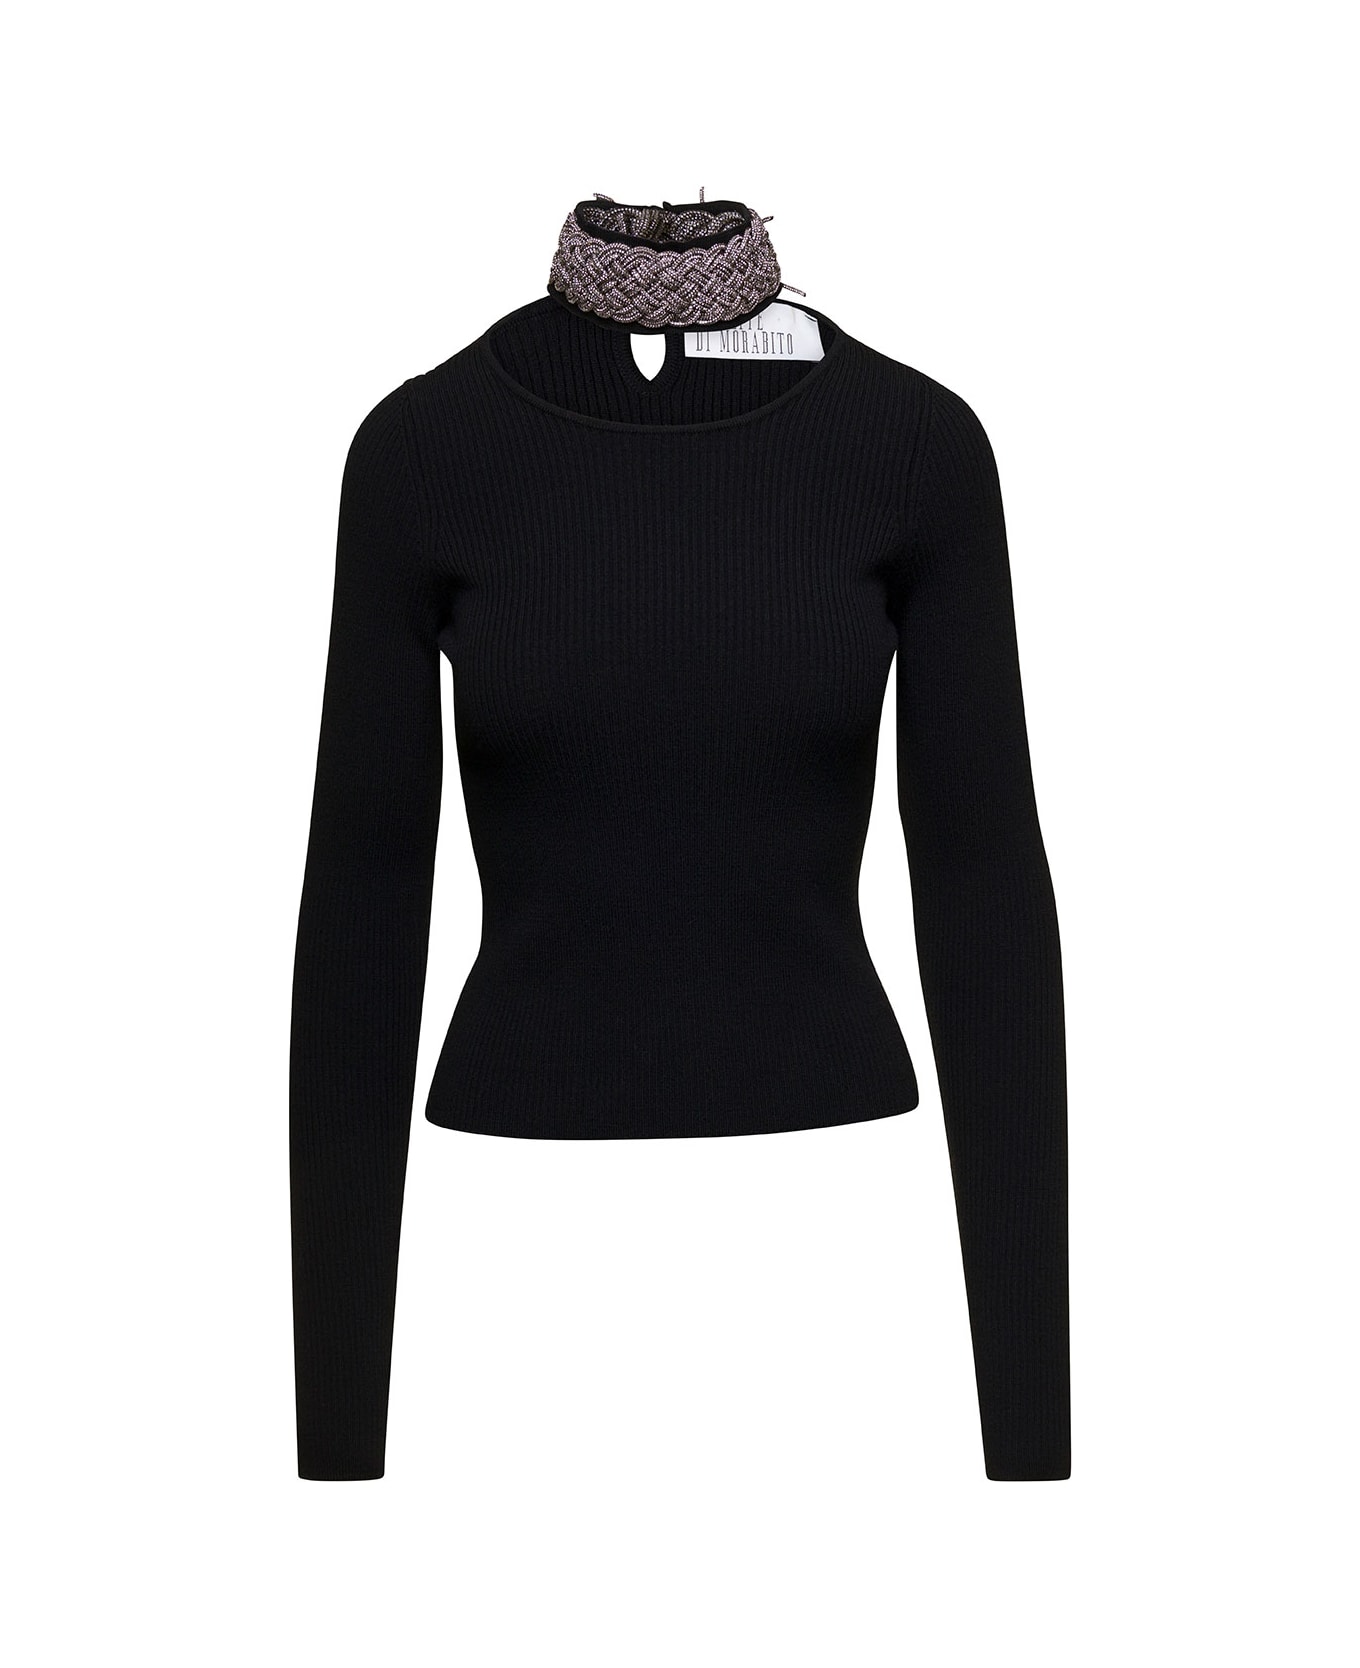 Giuseppe di Morabito Black Top Wuth Embellished Neck And Cut-out In Wool Blend Woman - Black